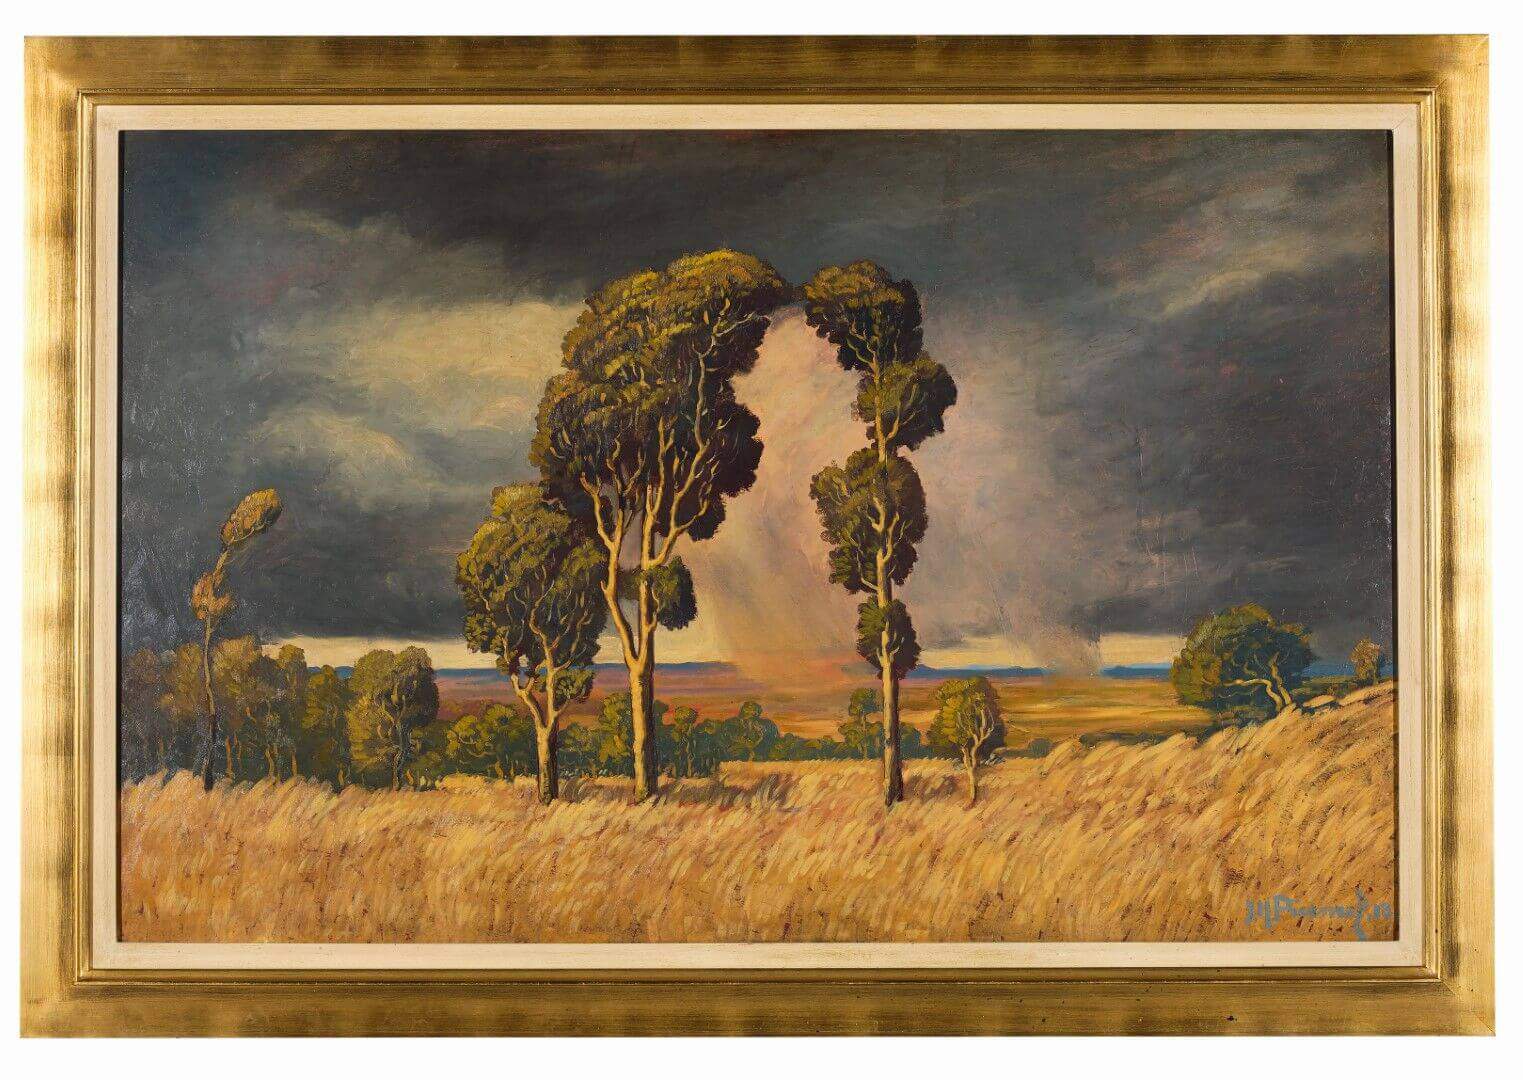 Jacob Hendrik Pierneef, Summer Rain in the Bushveld, signed and dated "18".